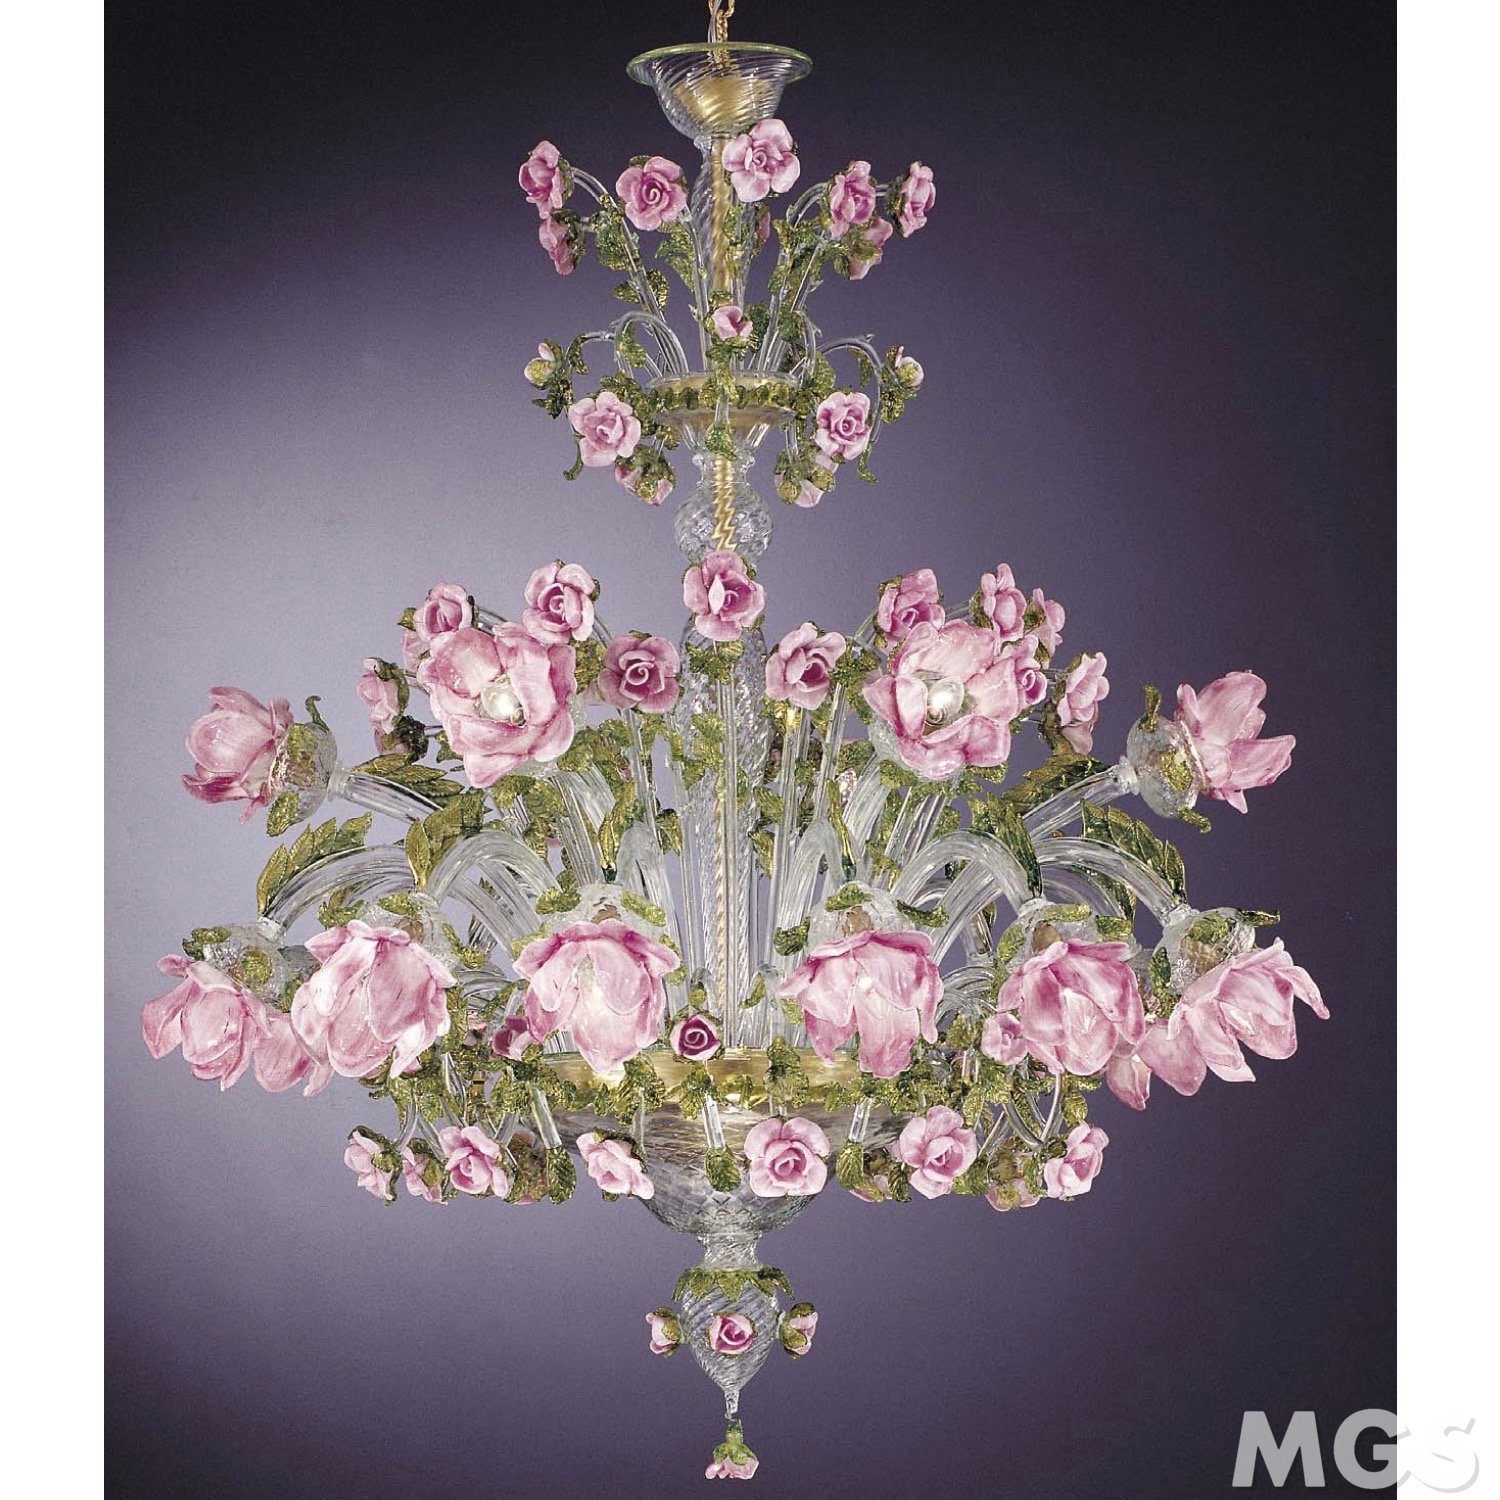 Shopping for Pastel Kitchen Accessories – Chandeliers and Roses